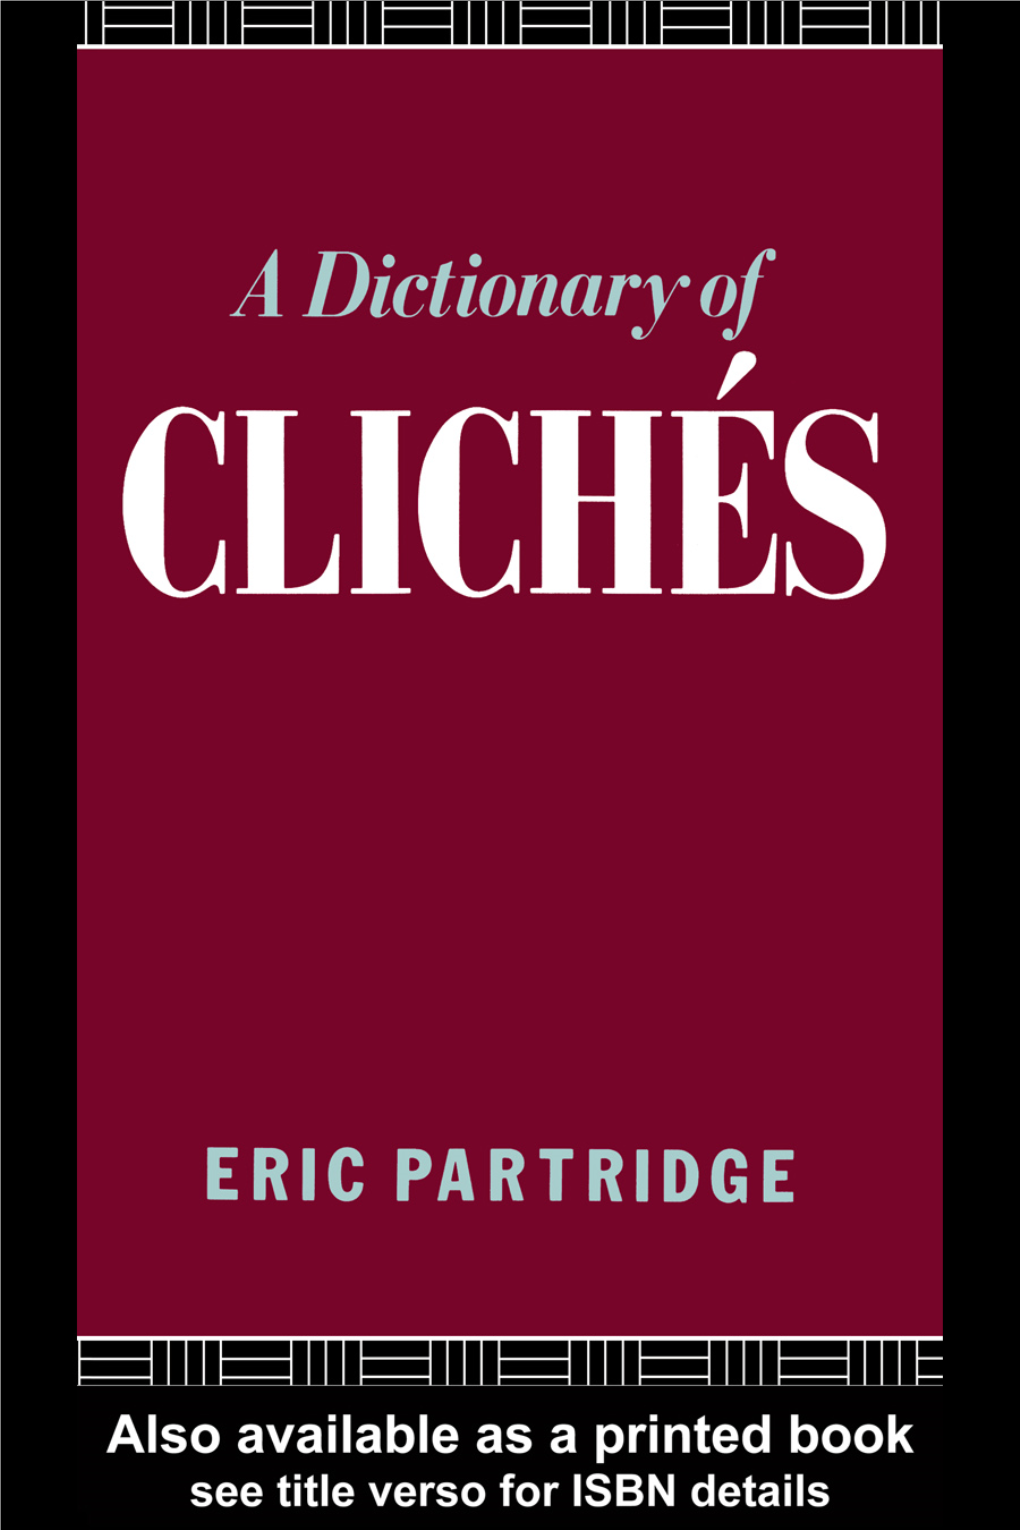 A DICTIONARY of CLICHÉS Other Partridge Titles Published by Routledge